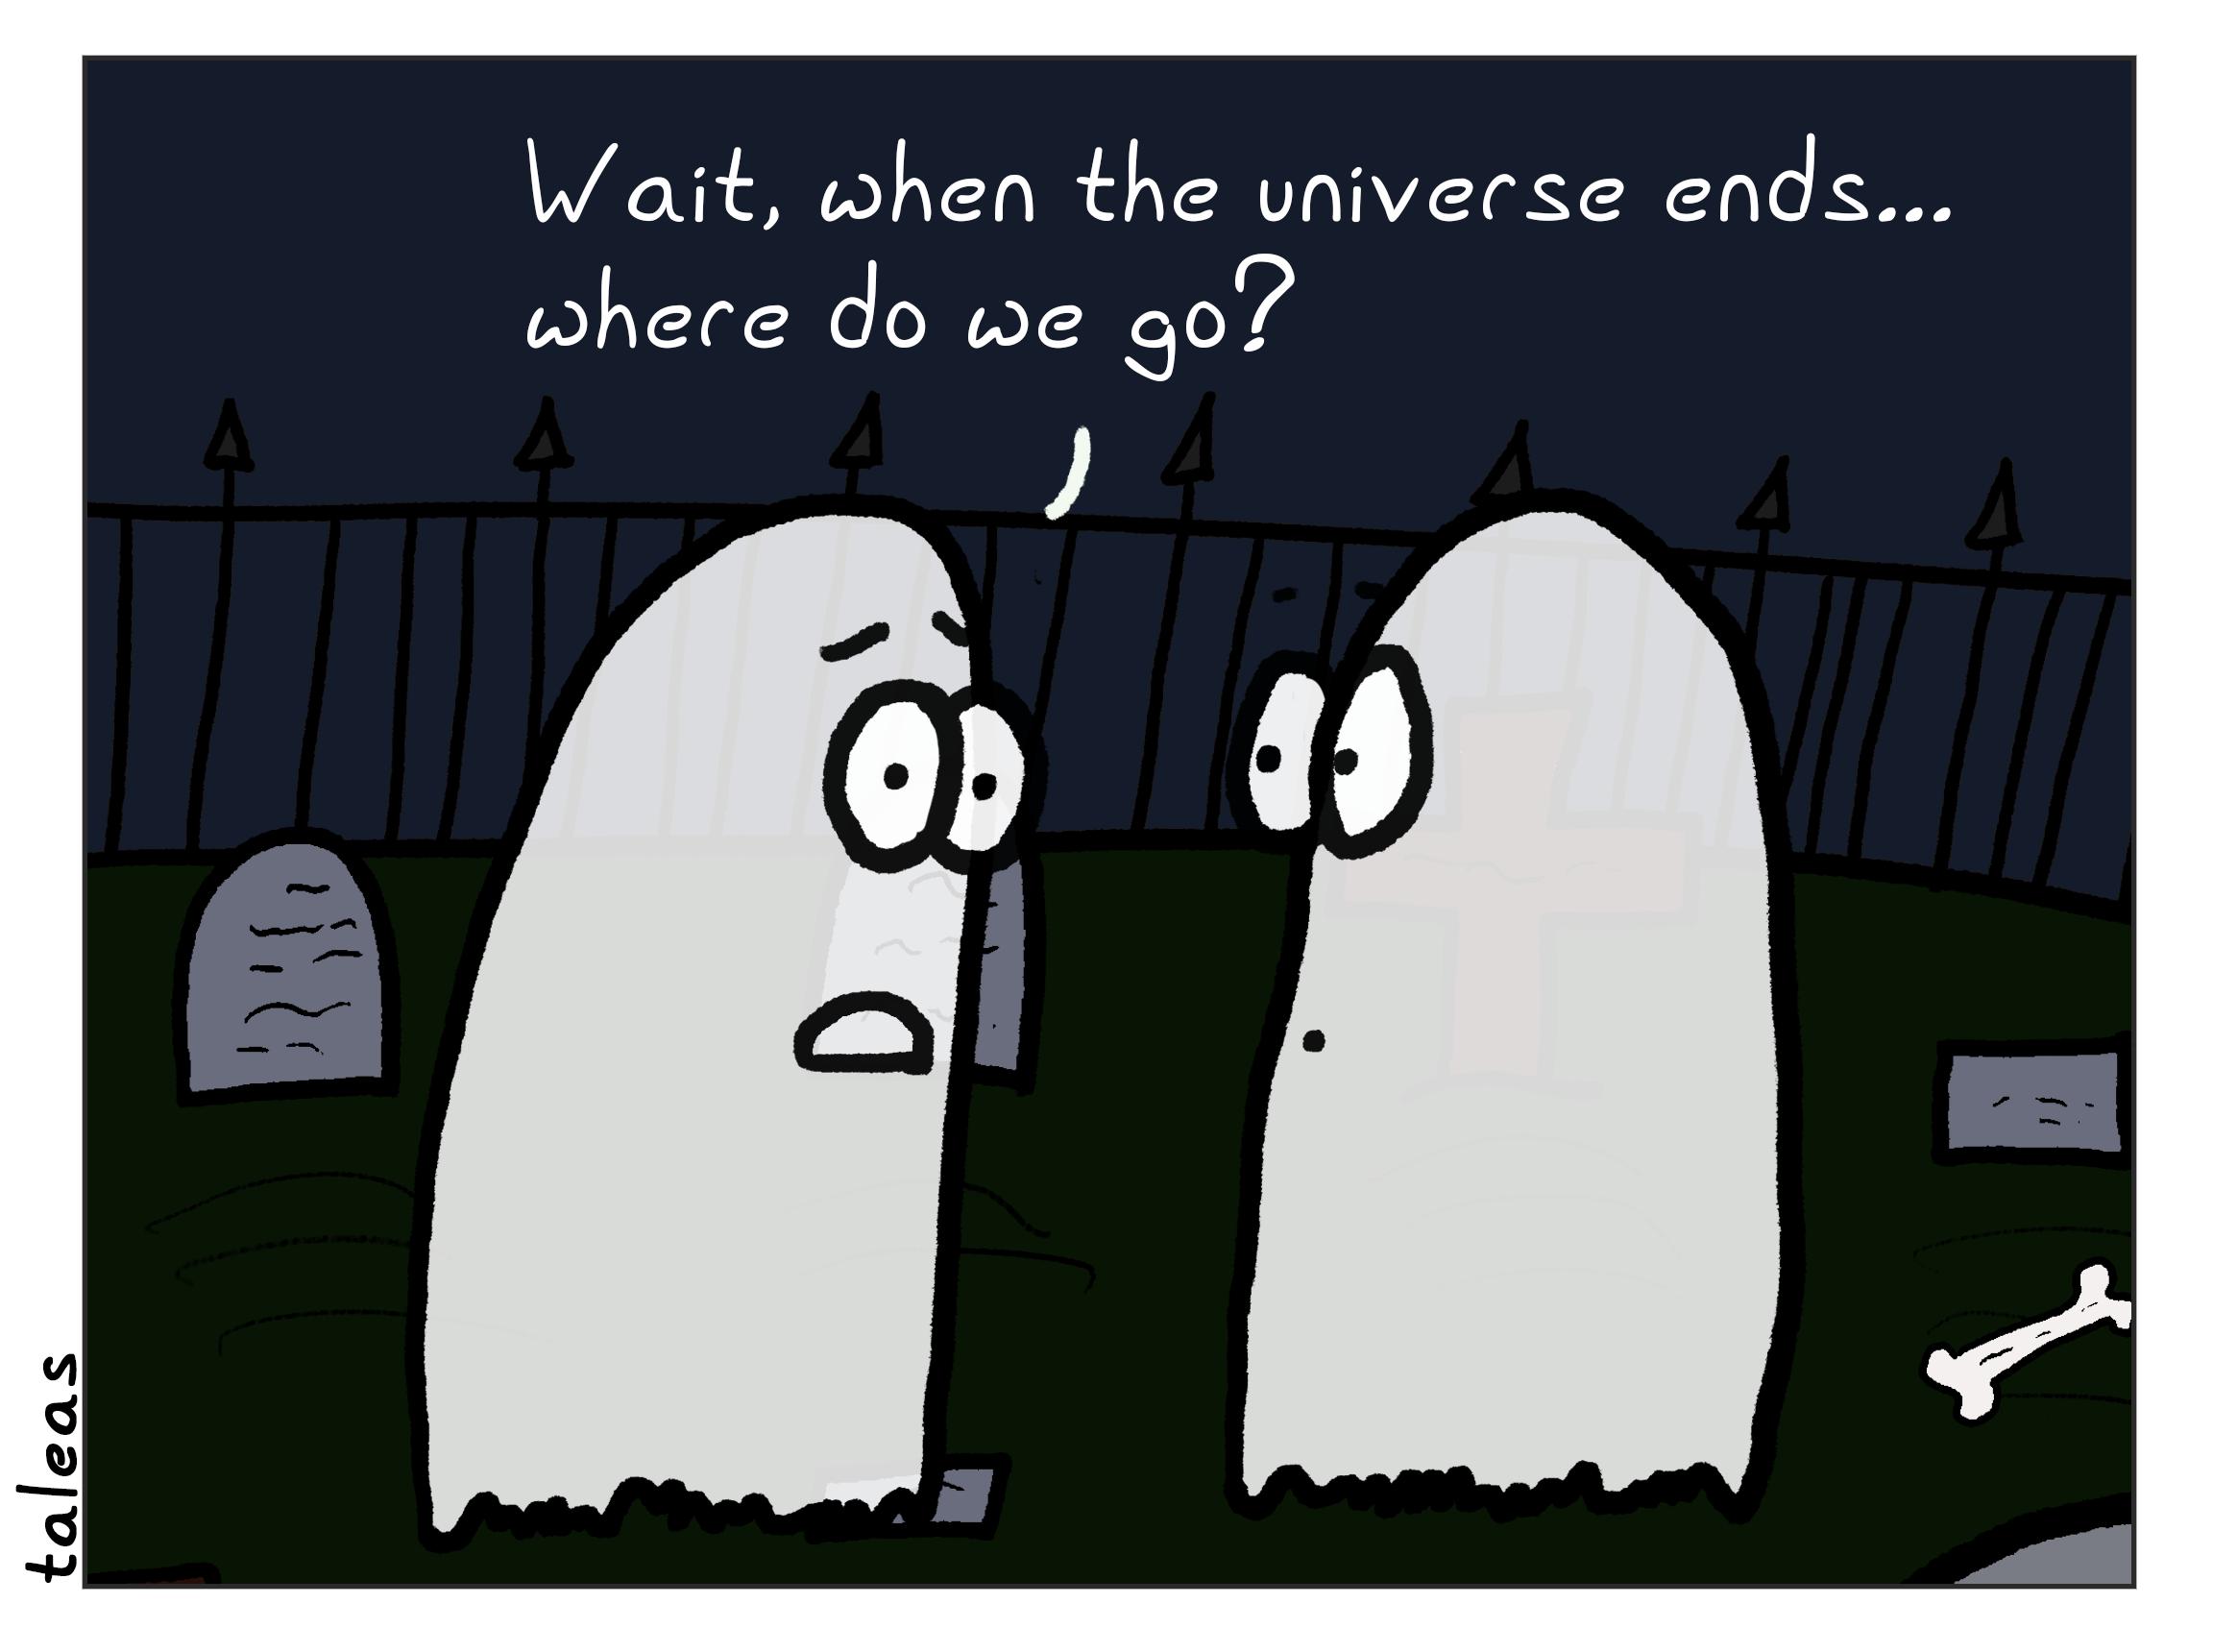 Two ghosts are chatting in a cemetery at night. With a concerned look, one asks, "Wait, when the universe ends...where do we go?".